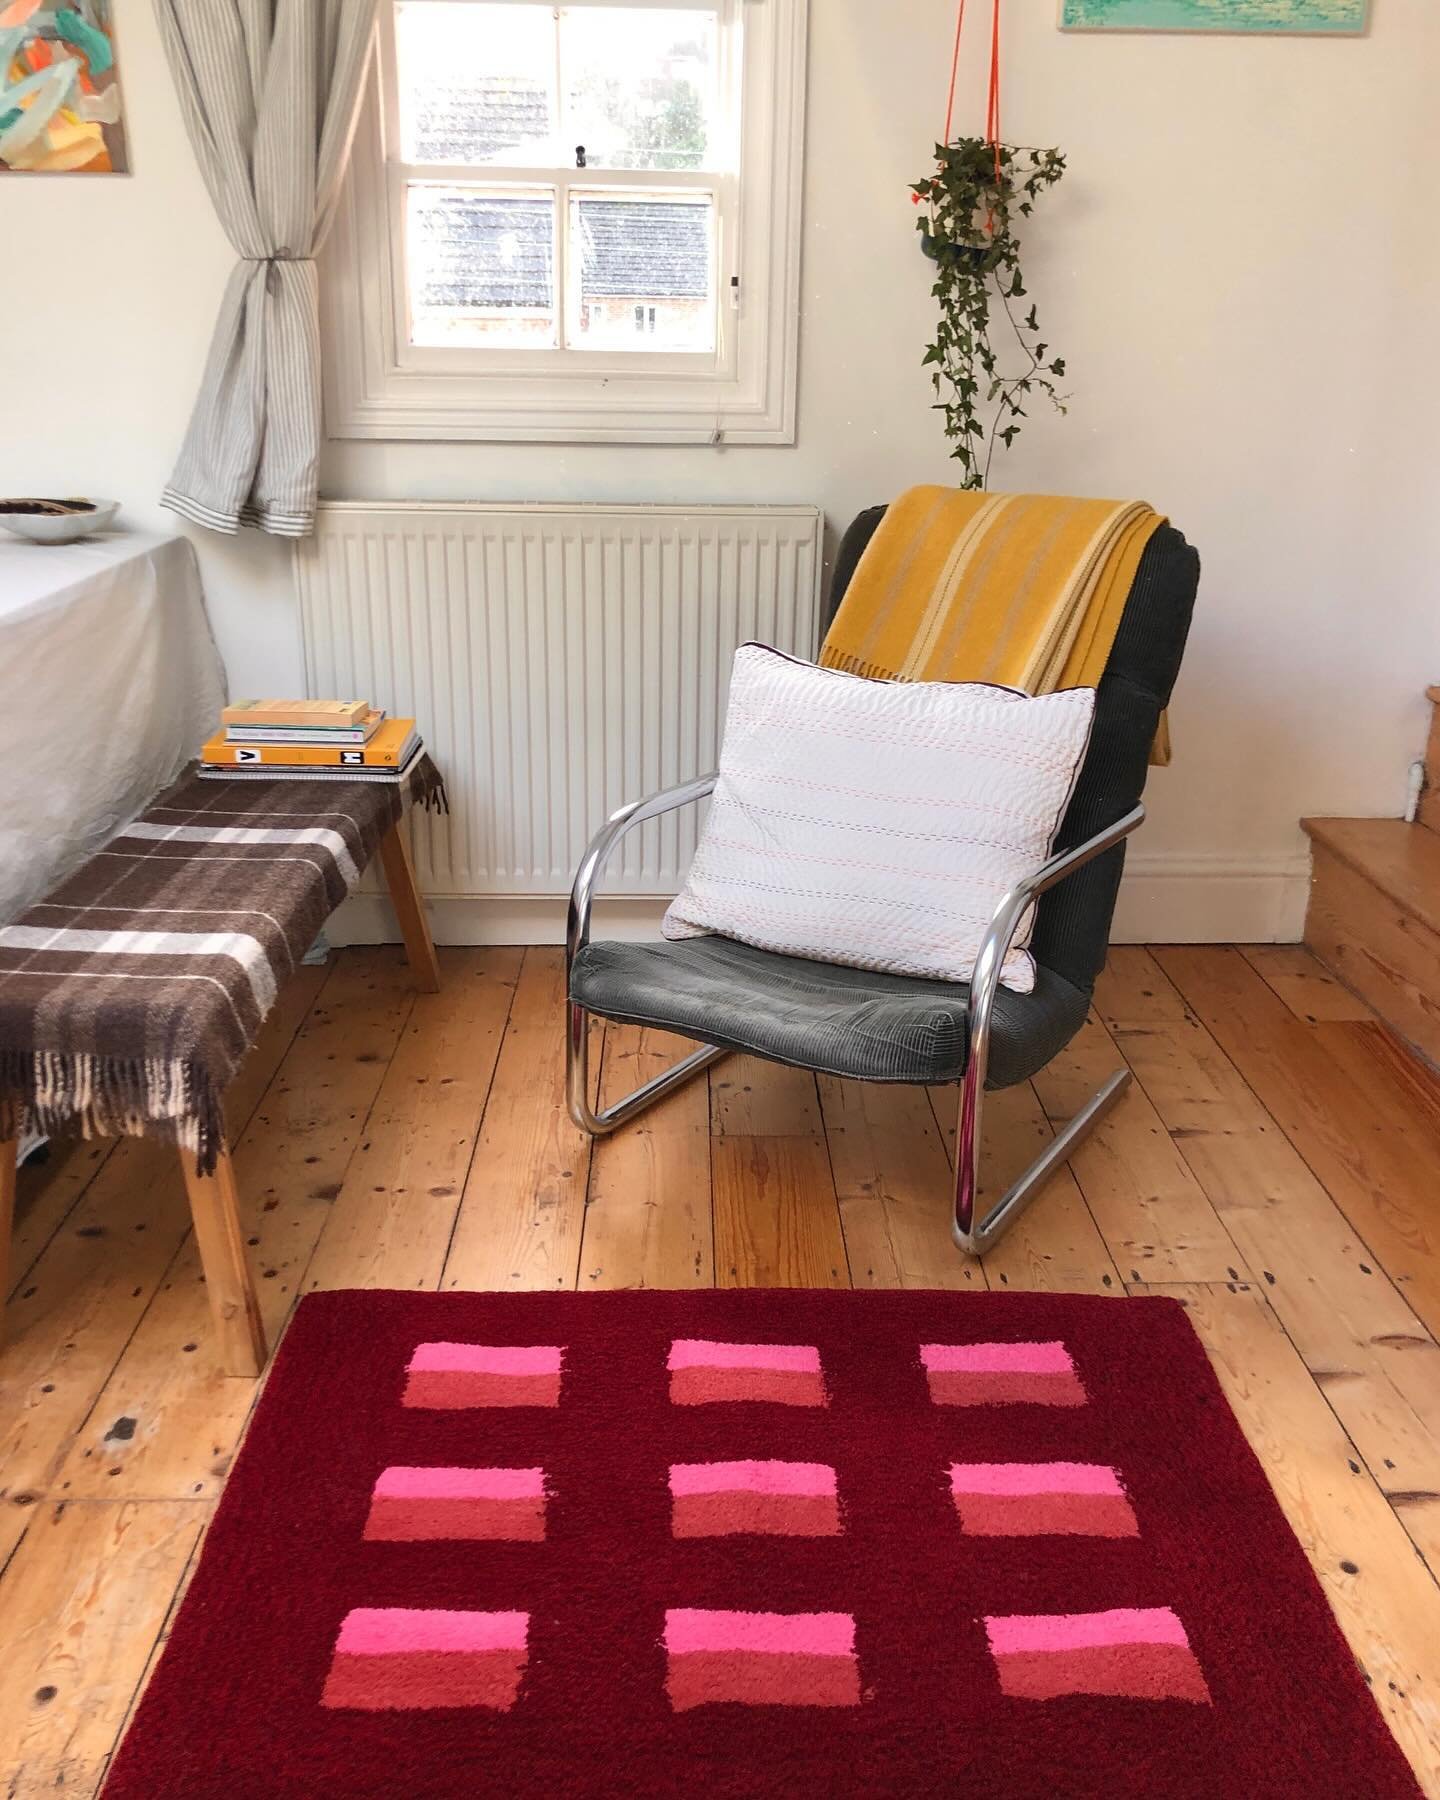 🍷❤️The mulled rug, inspired by drinking mulled wine and keeping cosy. This rug definitely adds a bit of warmth to the room weather it&rsquo;s cold outside or getting a bit more of a spring breeze! 

The hanni design is contemporary and classic and g